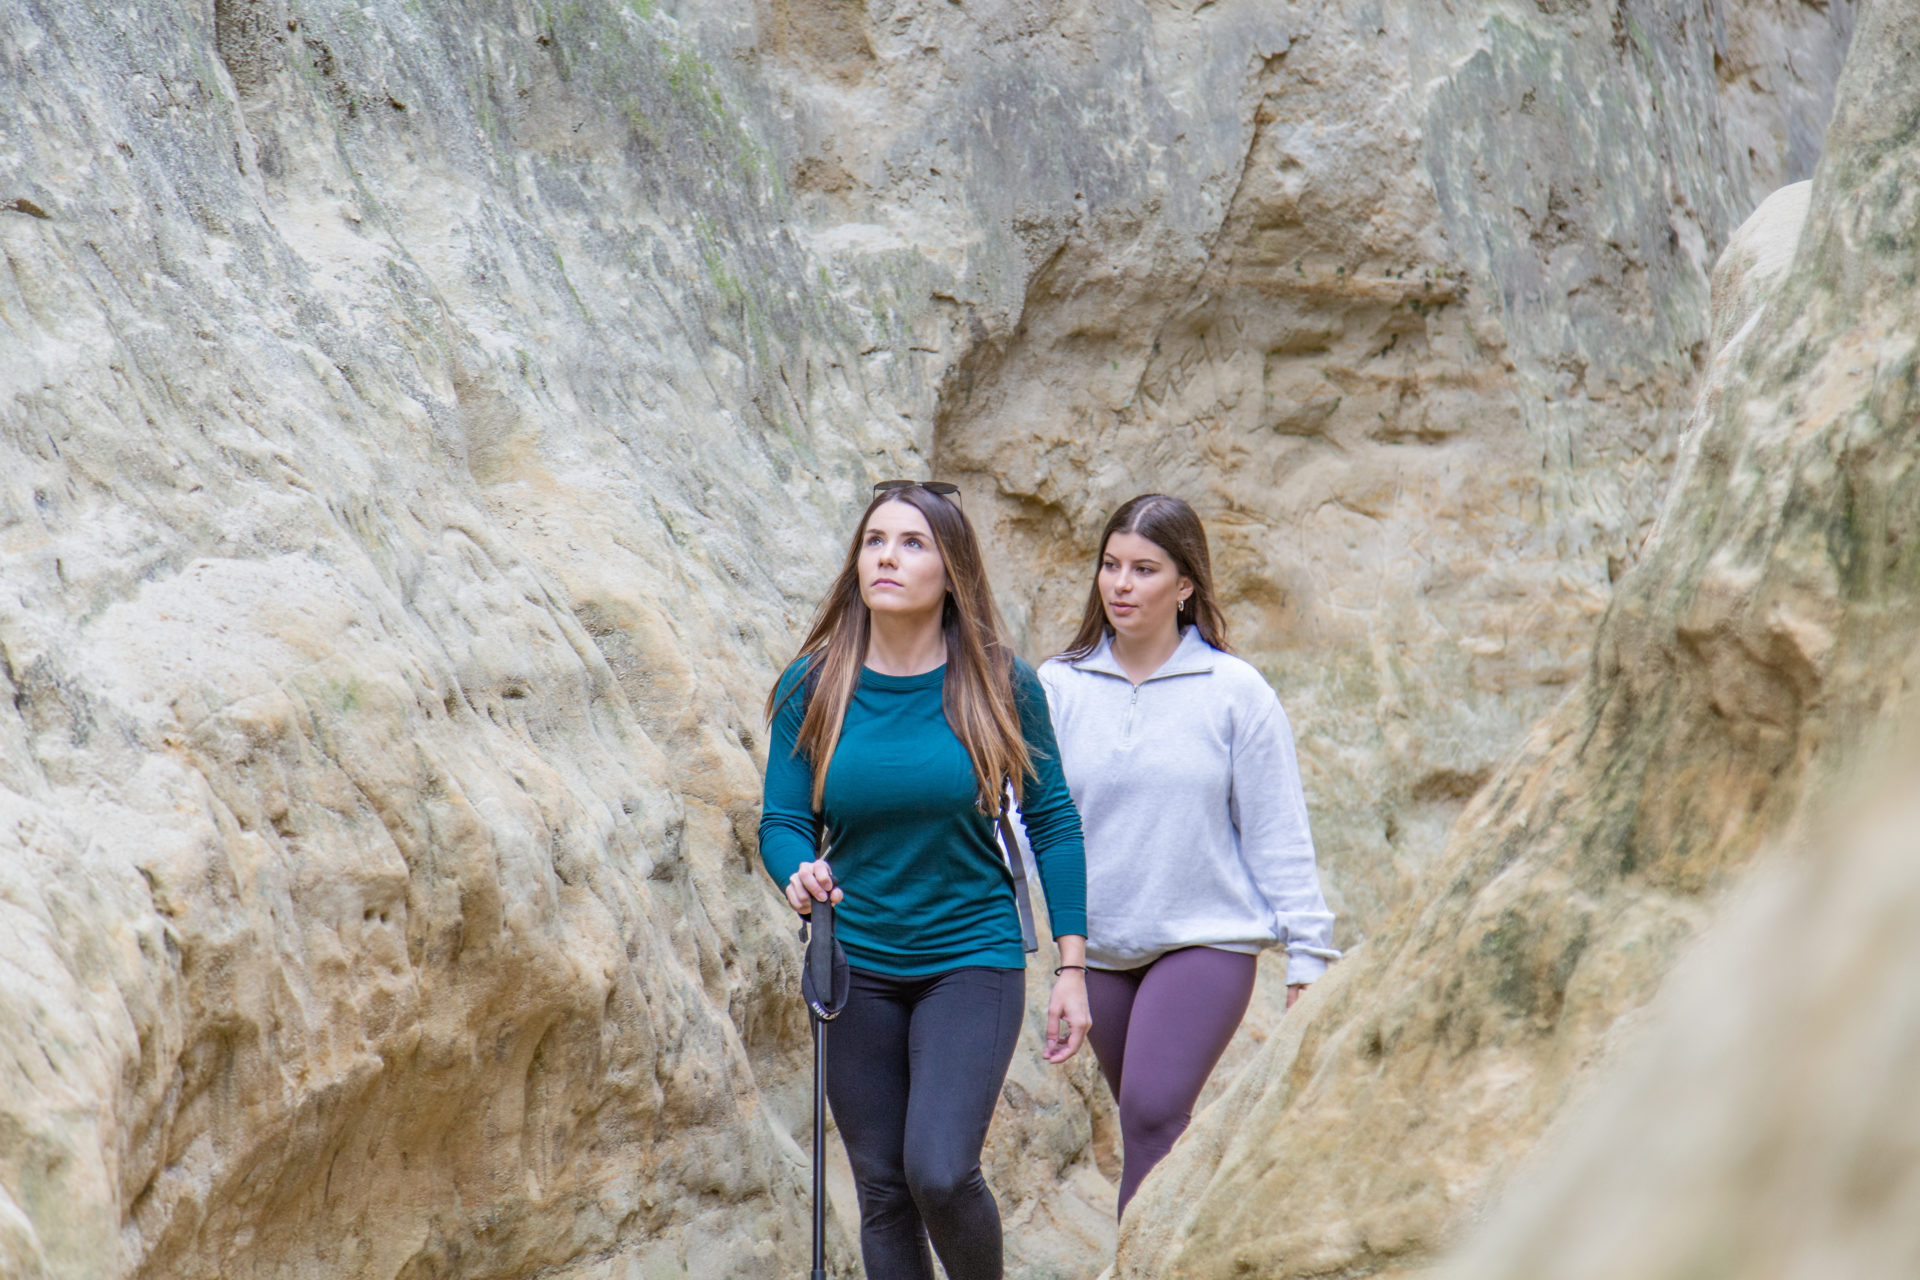 2 women hike the slot canyon at Annie's Canyon Trail in San Elijo Lagoon